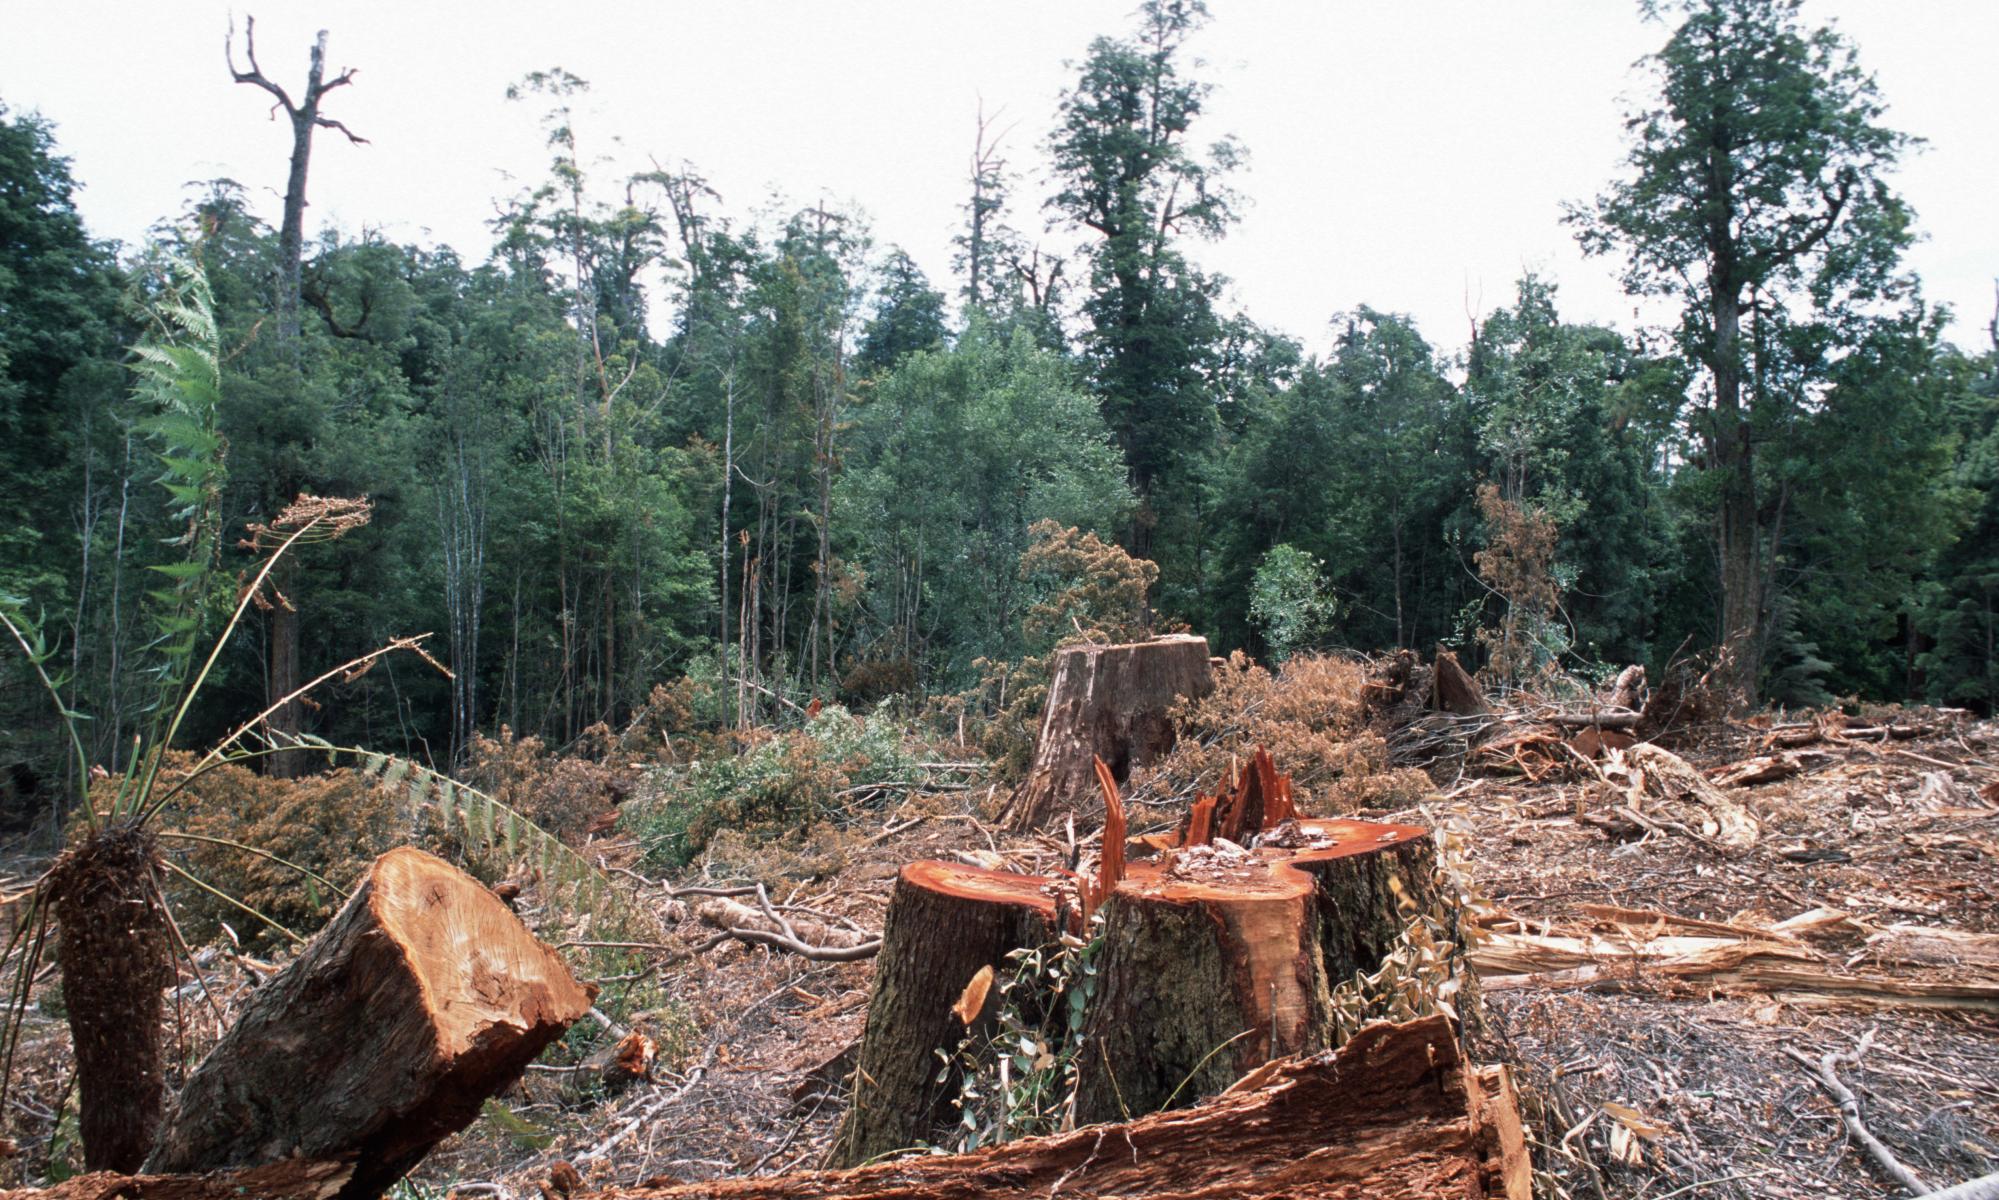 Australian scientists say logging, mining and climate advice is being suppressed